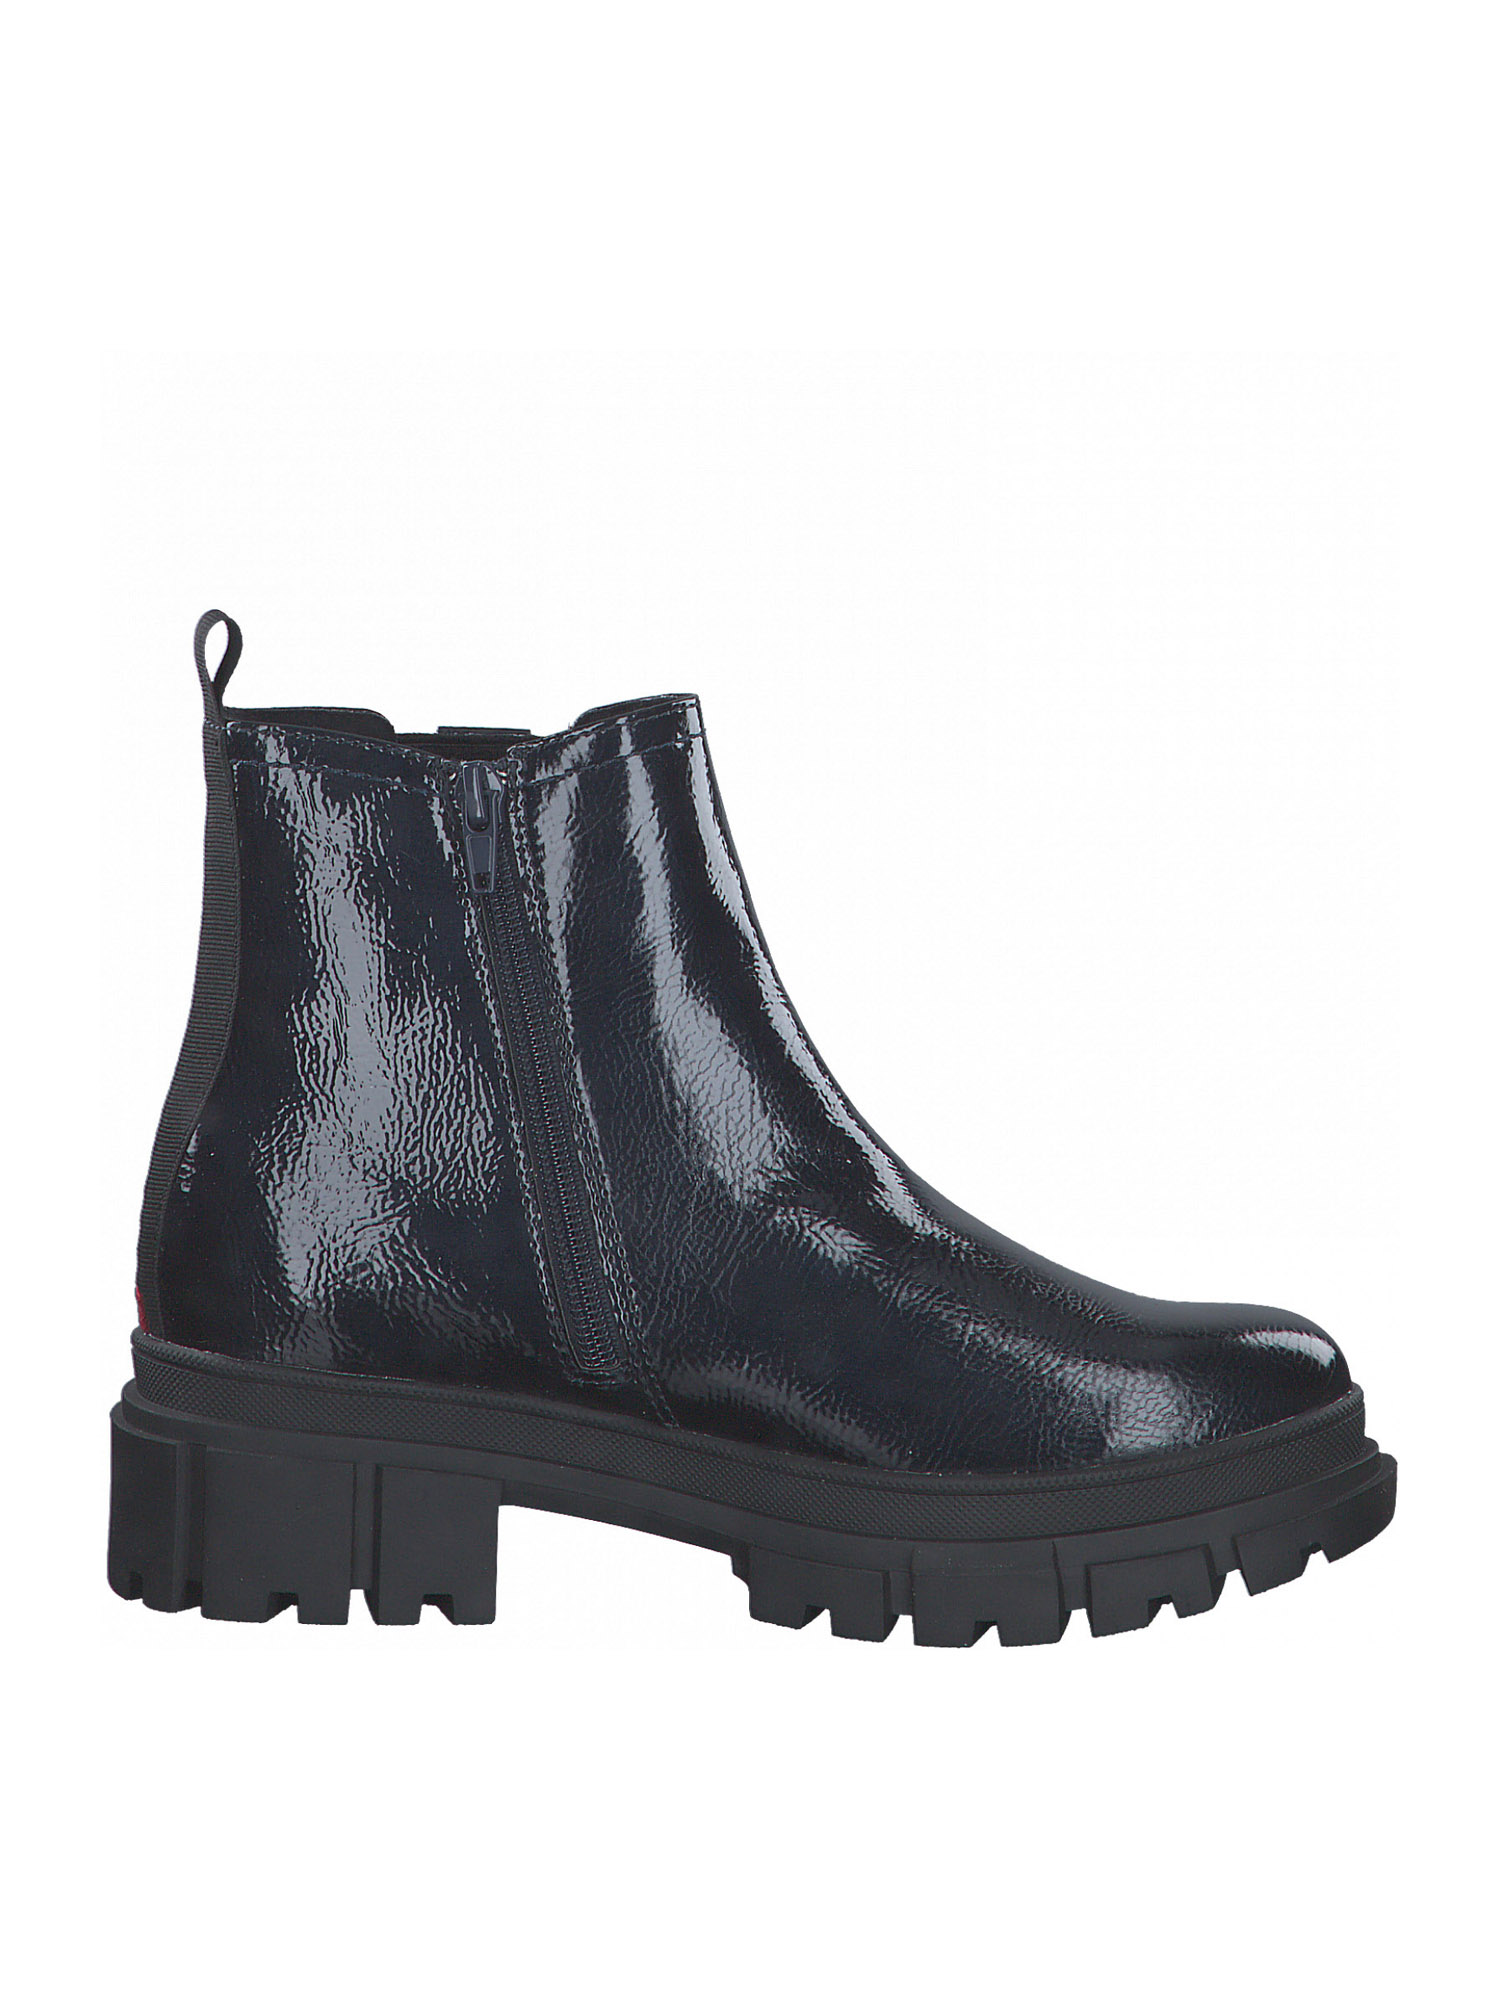 s.Oliver Chelsea Boots in Dunkelblau 